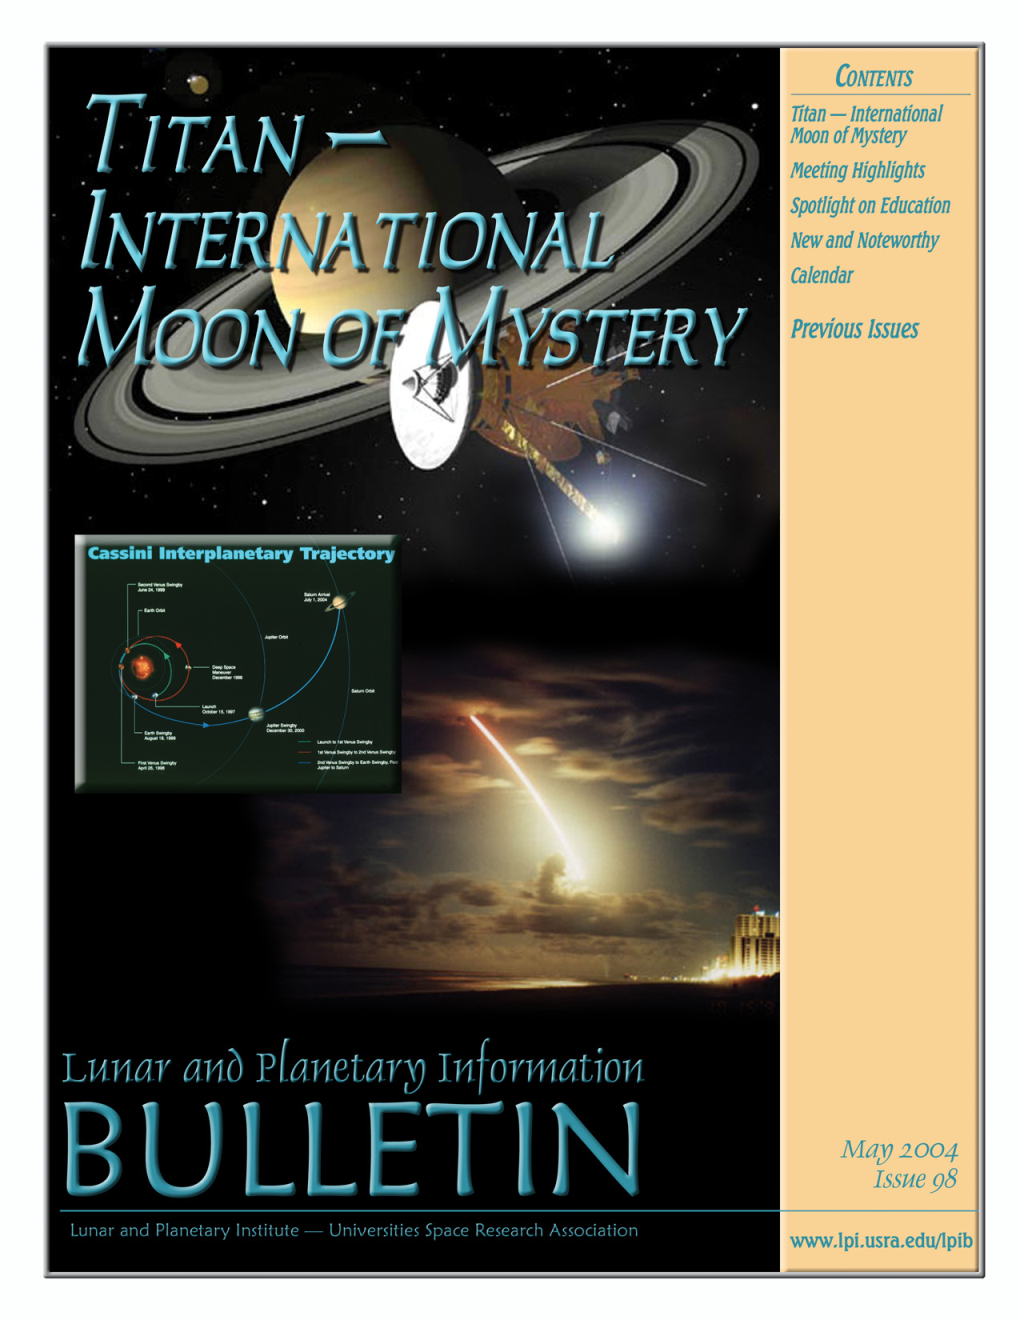 Lunar and Planetary Information Bulletin, Issue 98